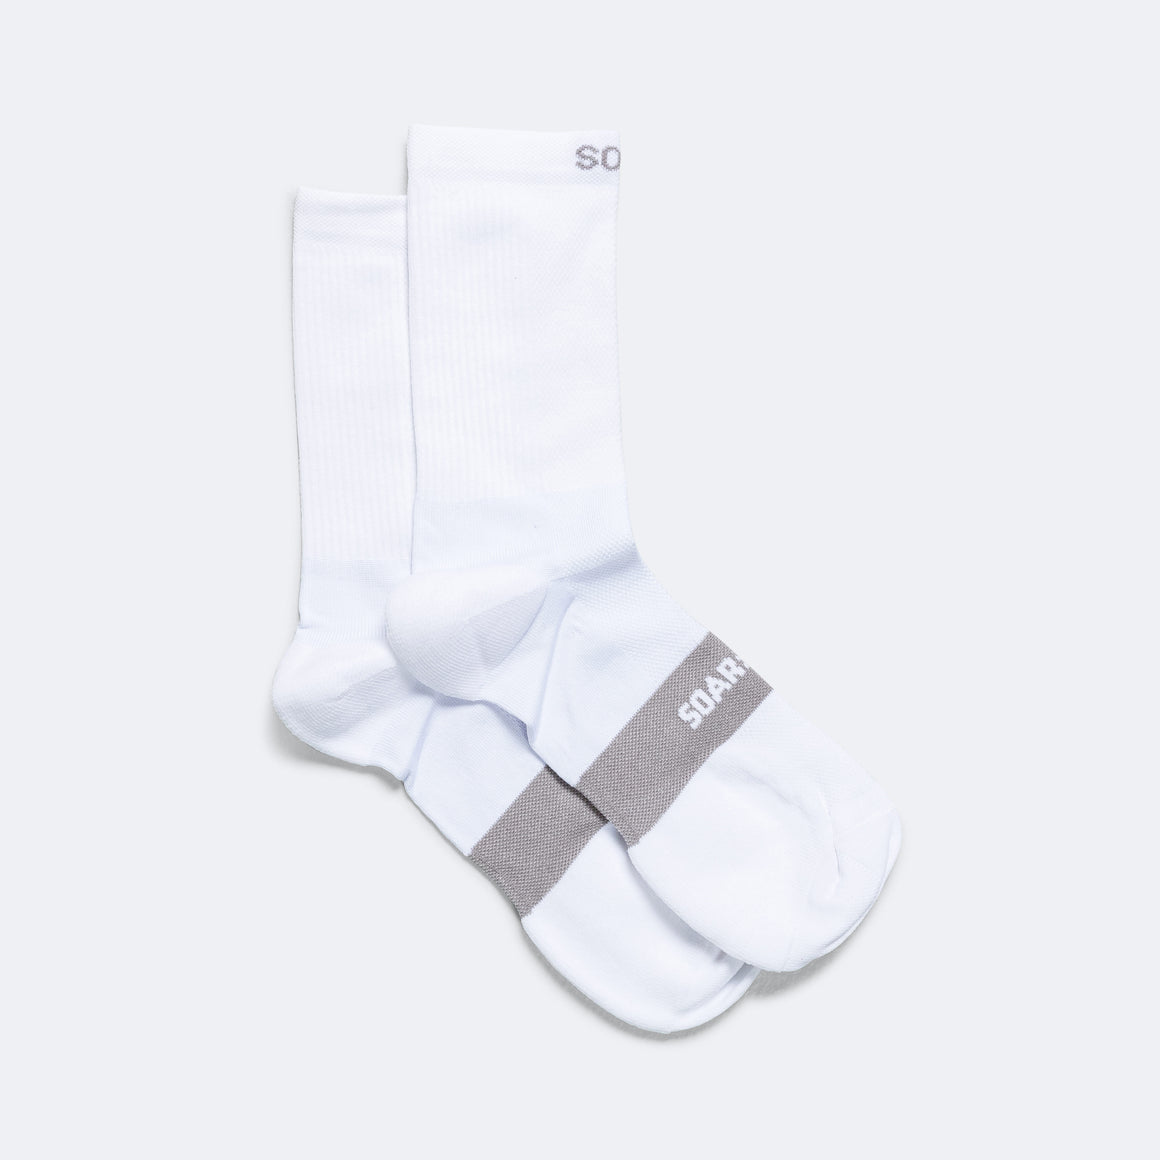 Soar - Crew Socks - White - Up There Athletics